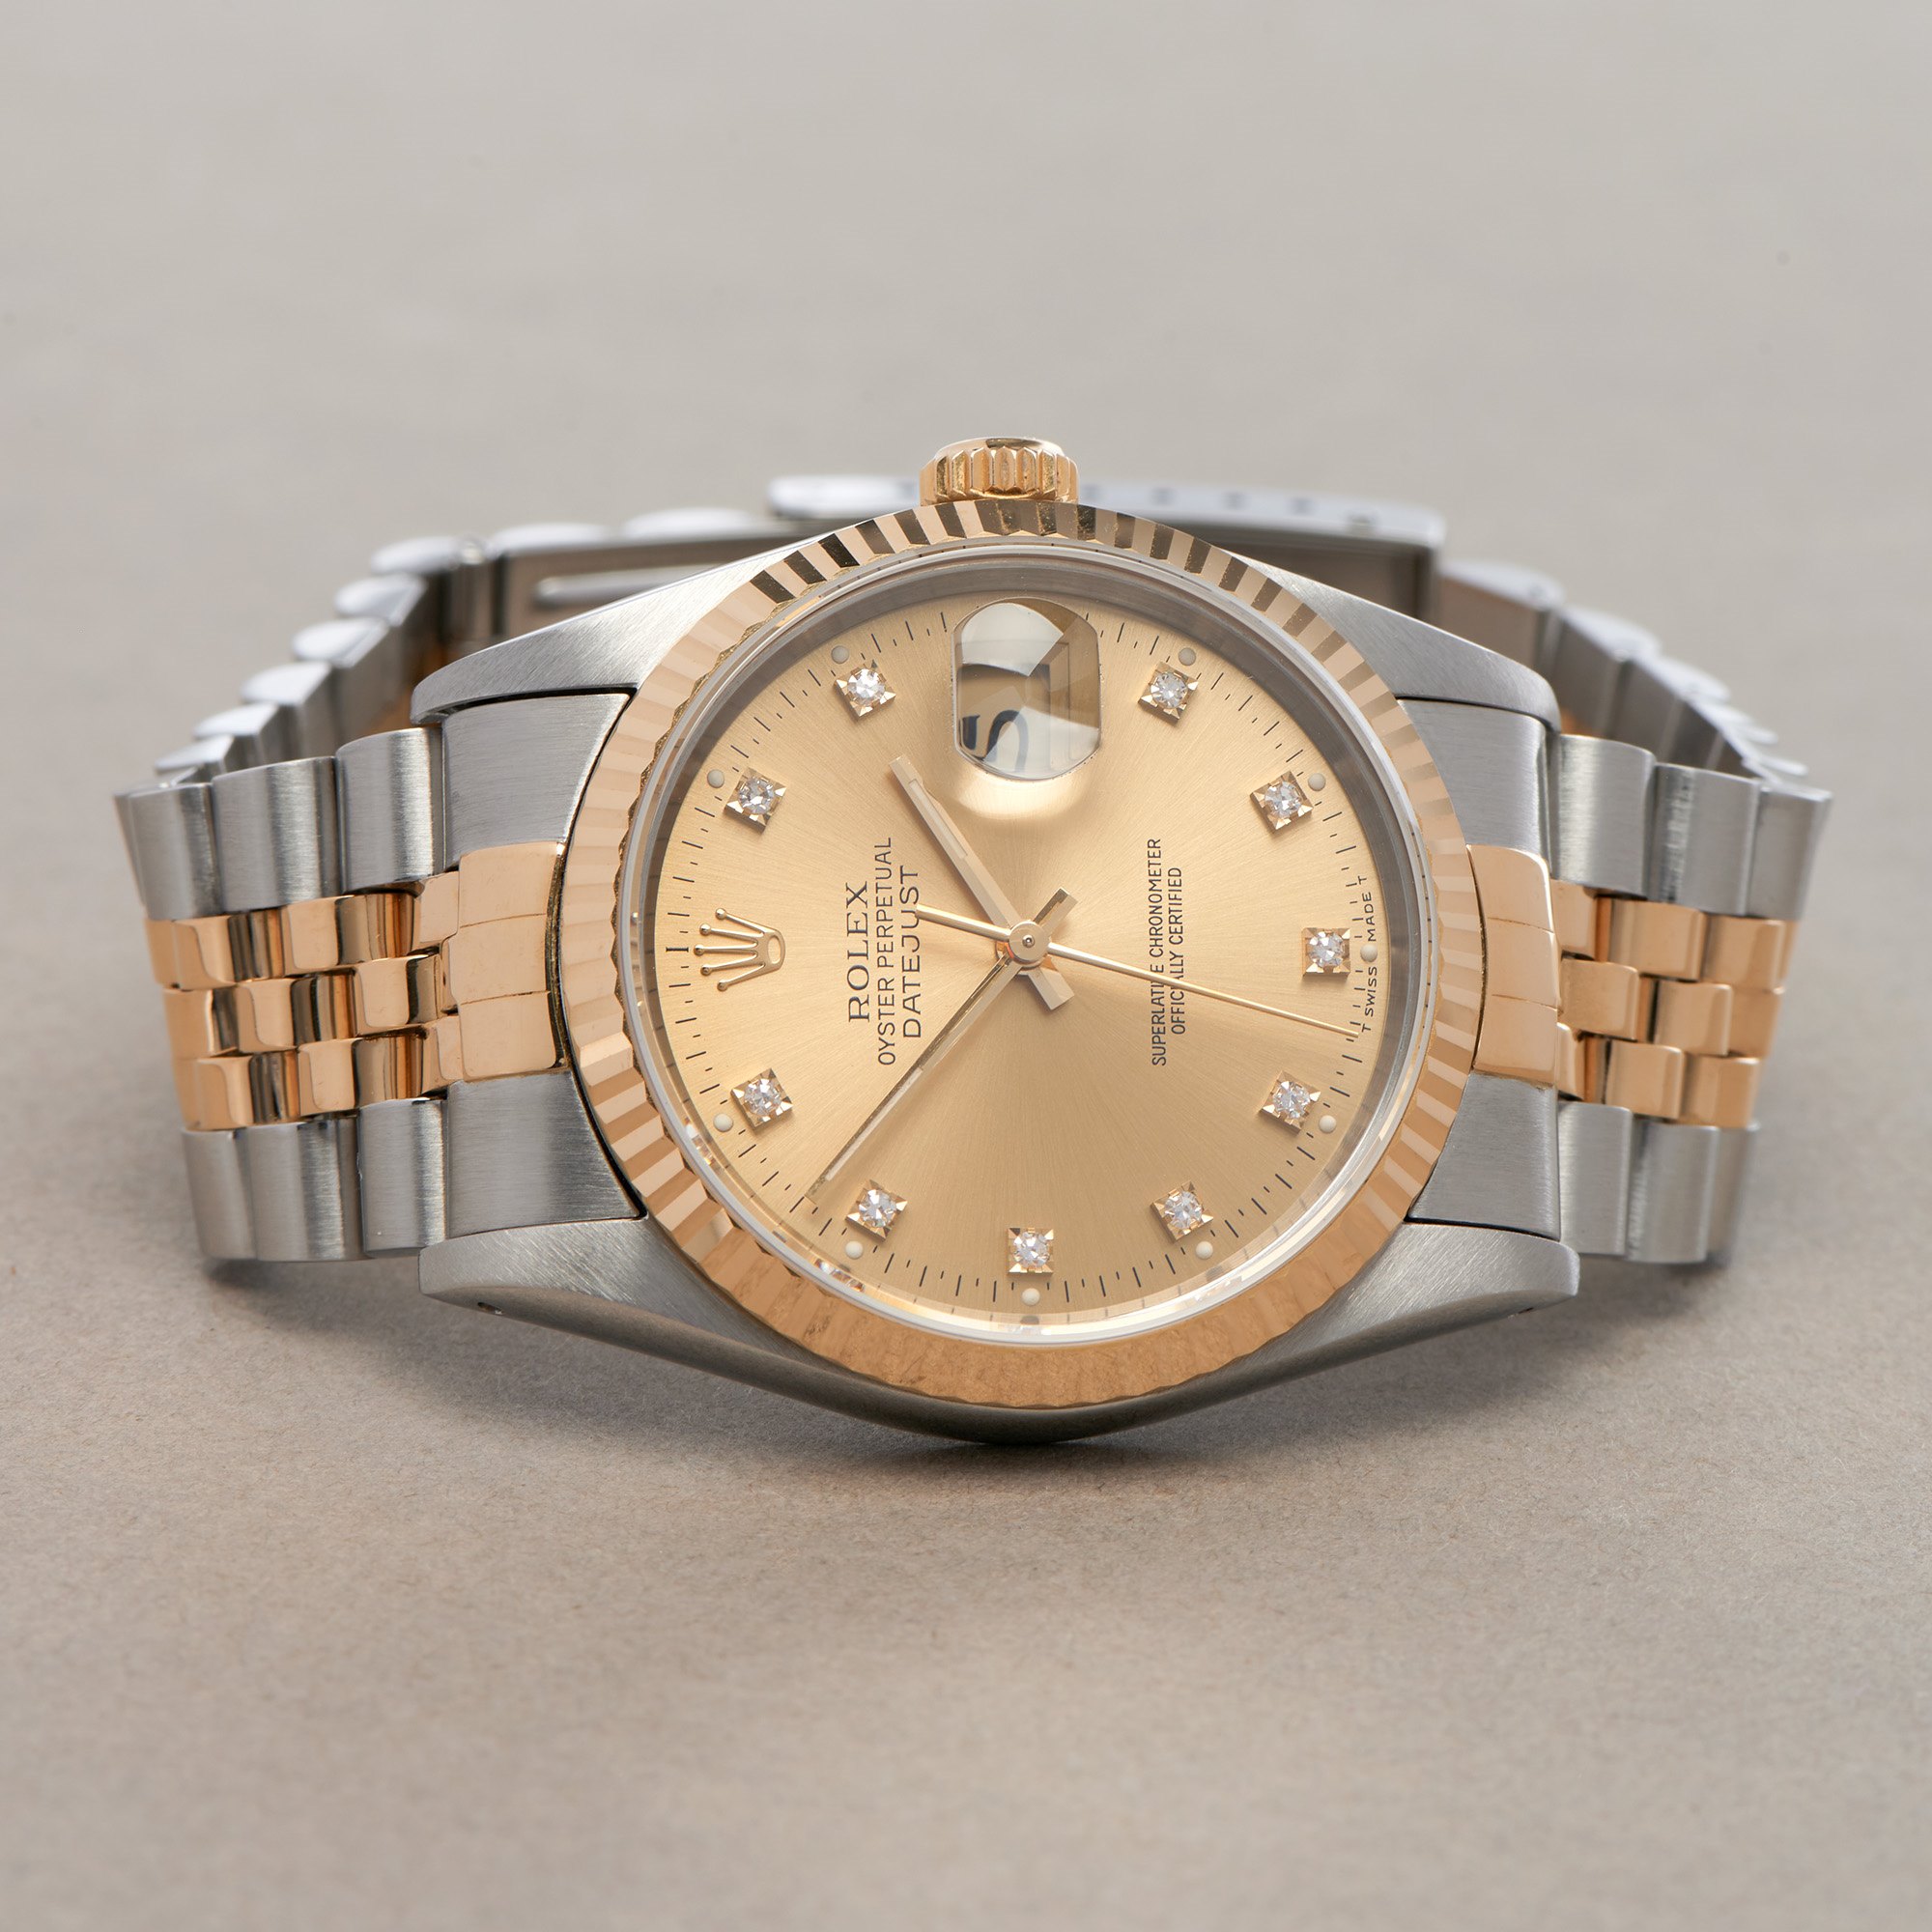 Rolex Datejust 36 18K Yellow Gold & Stainless Steel 16233G